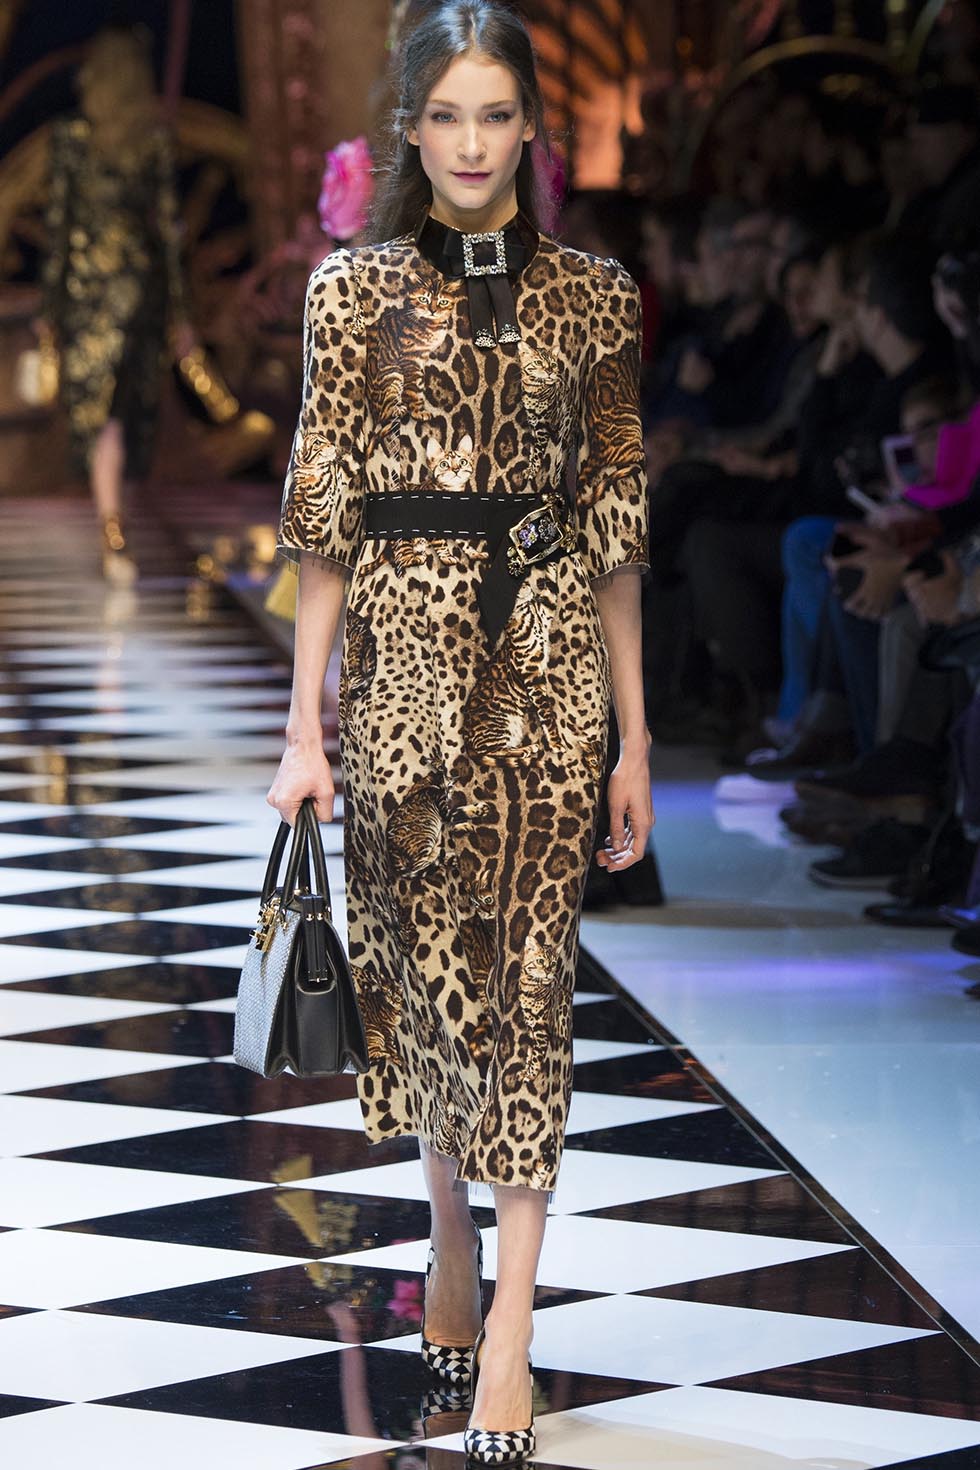 Leopard print a trend for forever and ever